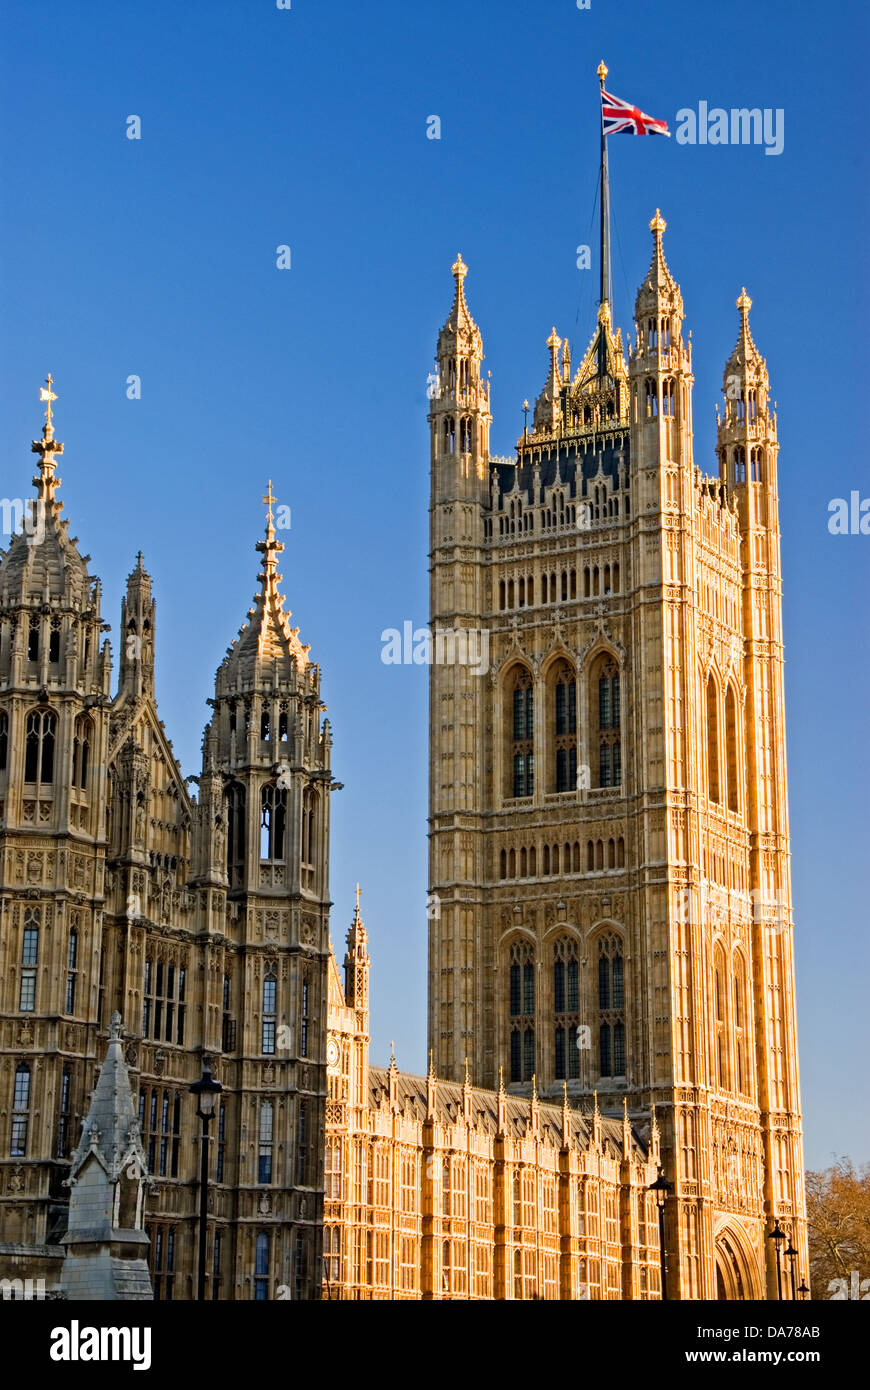 Ornate tower at West entrance of Palace of Westminster with flag of Great Britain flying. Stock Photo